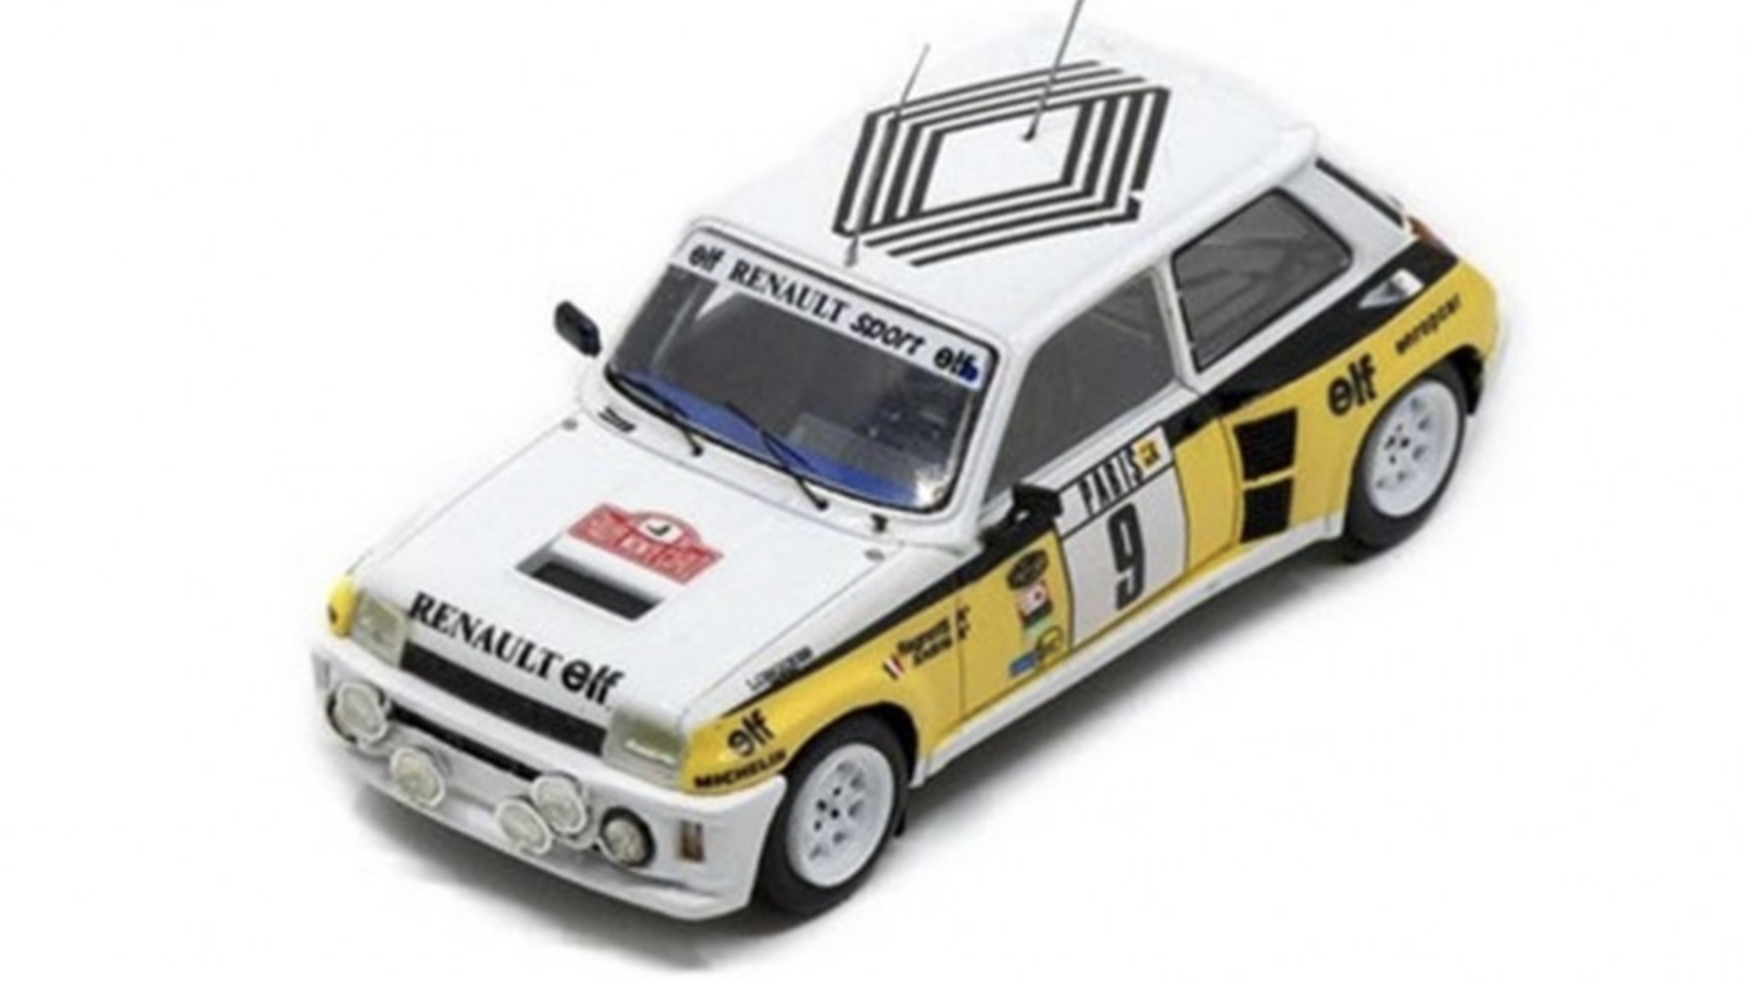 RENAULT 5 TURBO N°9 7TH RALLY MONTE CARLO 1983 SPARK 1/43°